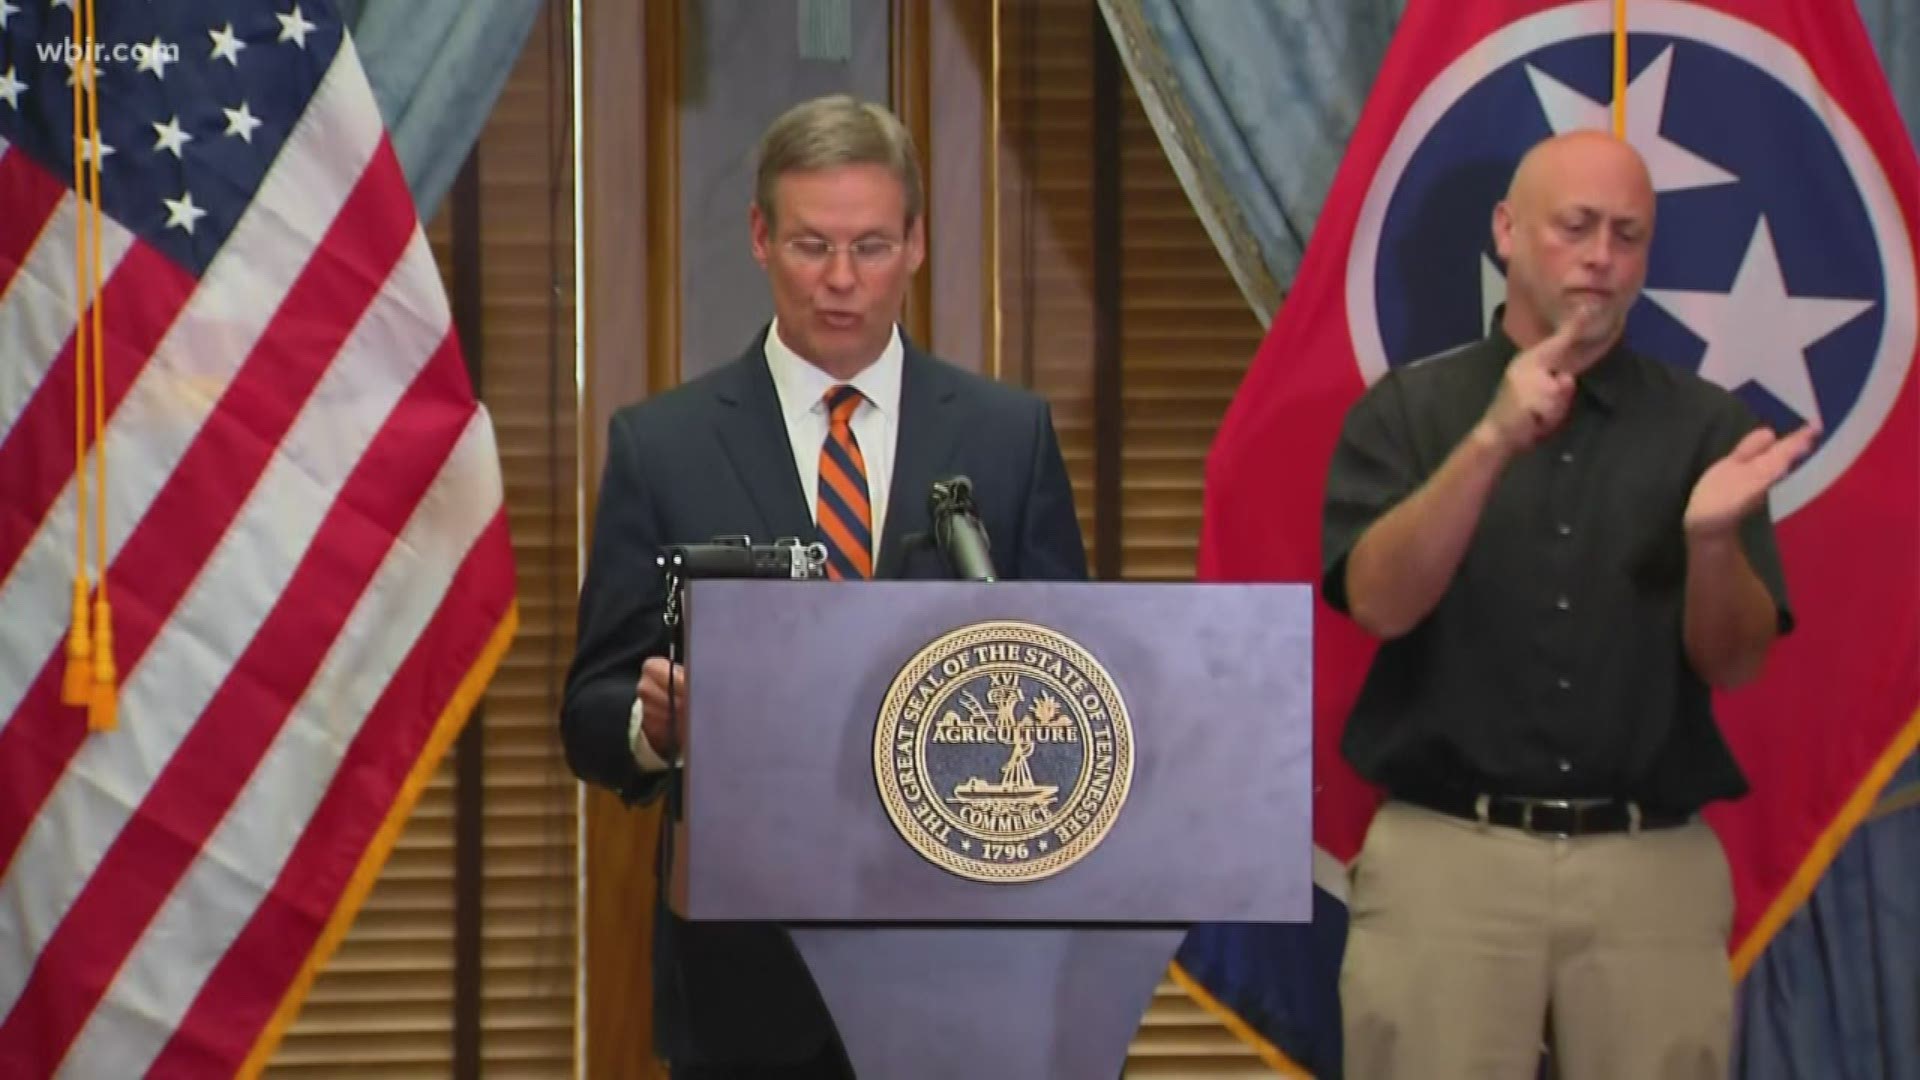 Tennessee Governor Bill Lee declared a state of emergency to help fight the coronavirus pandemic on Thursday.